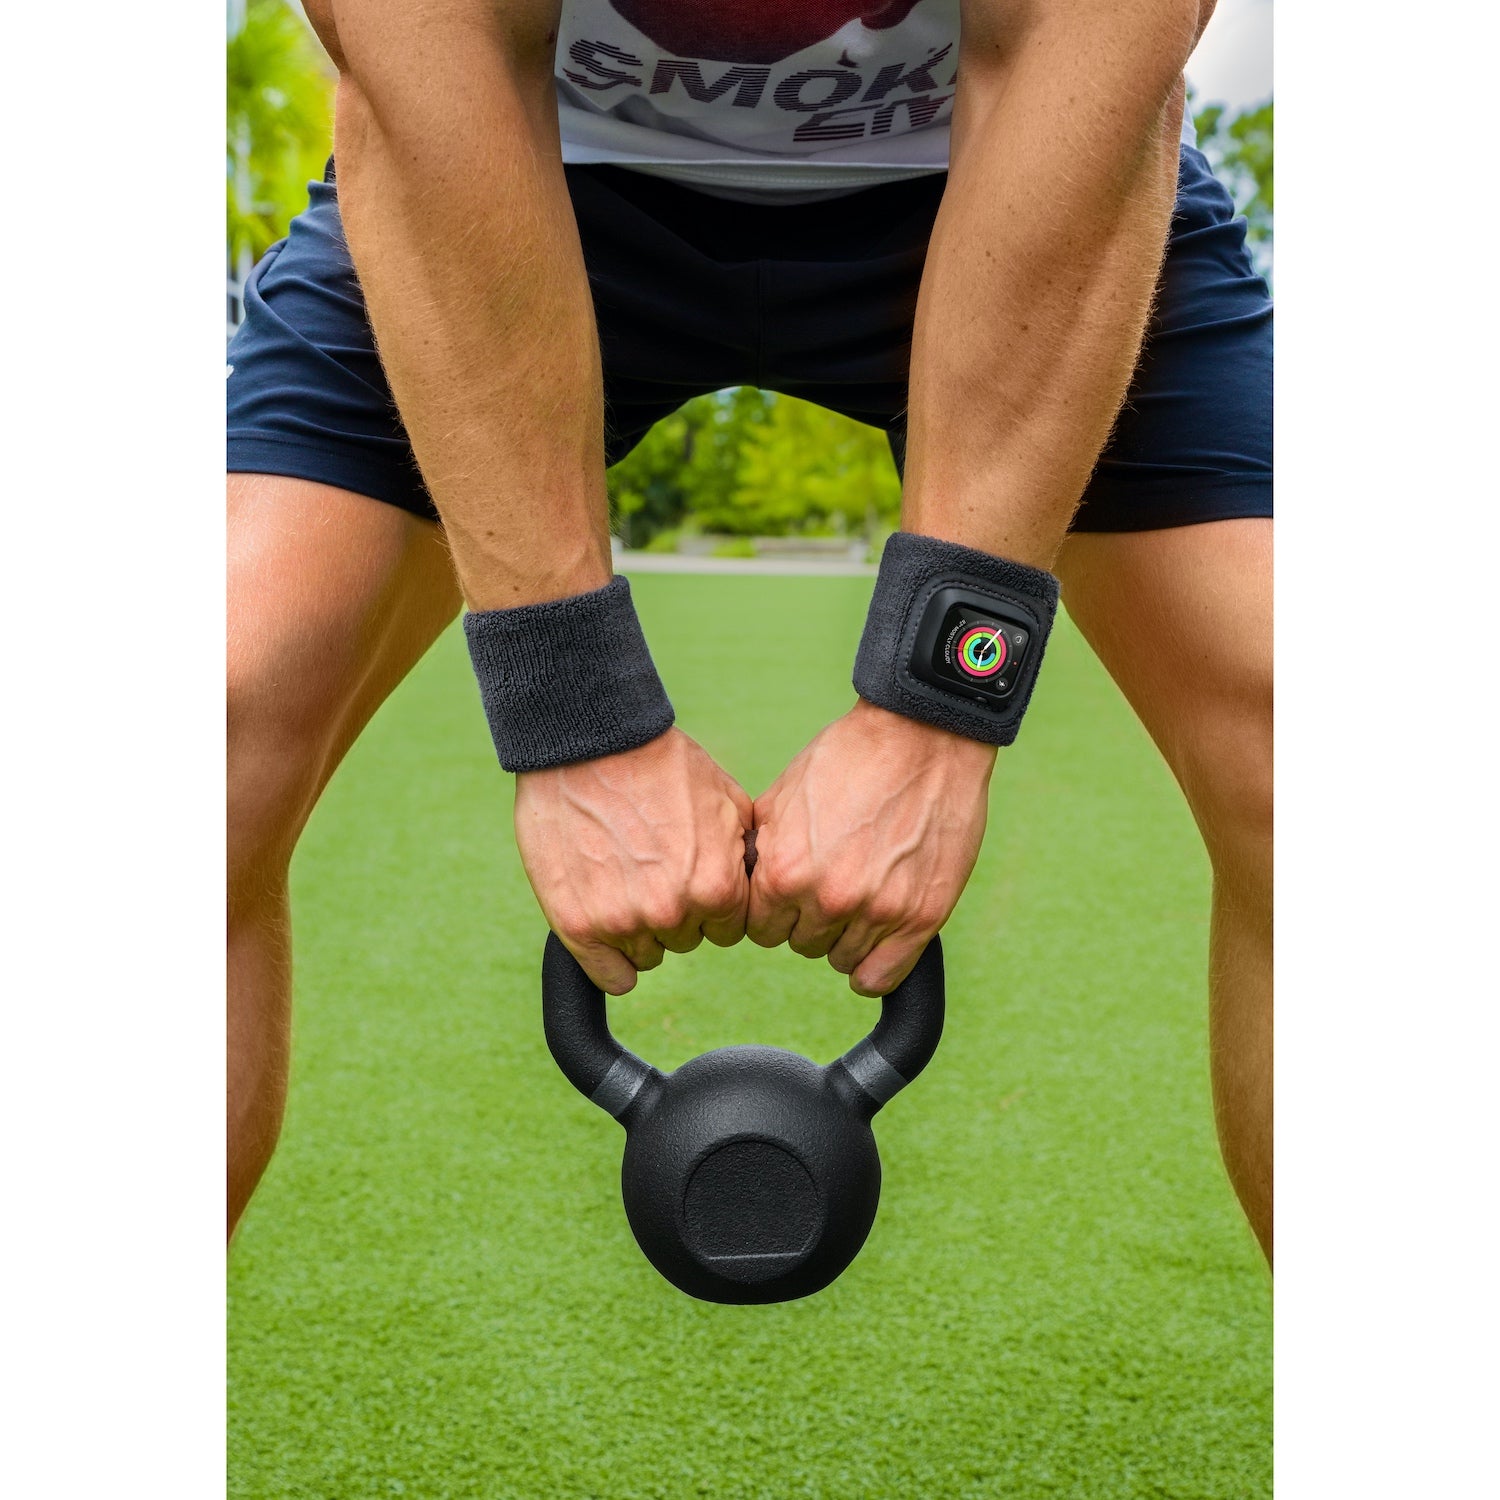 ActionBand for Apple Watch 45mm - Black